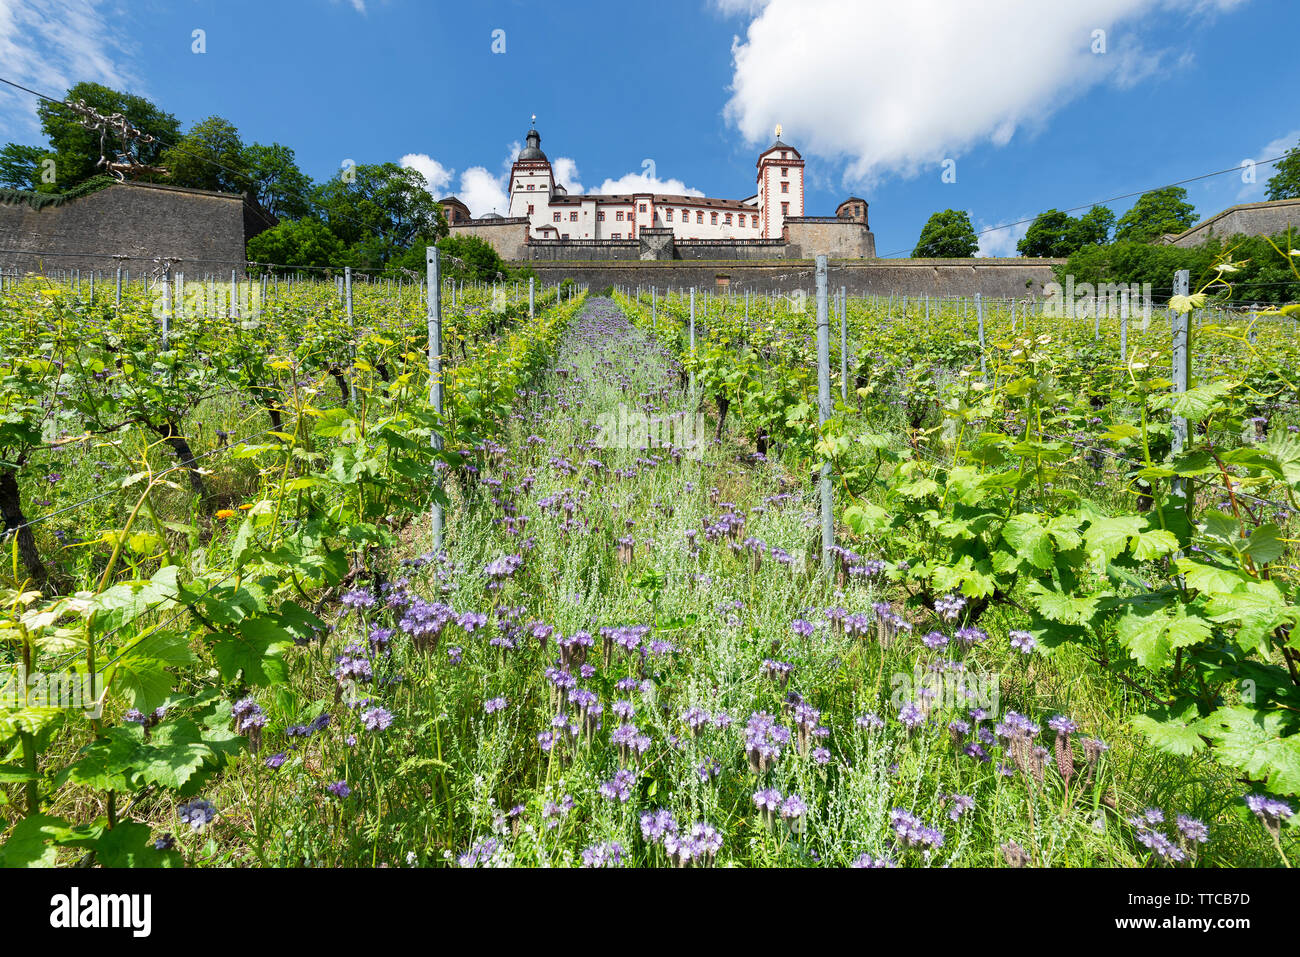 View through grapevines and flowering wildflowers up to the fortress Marienberg above the town of Würzbuerg am Main, Bavaria, Germany Stock Photo